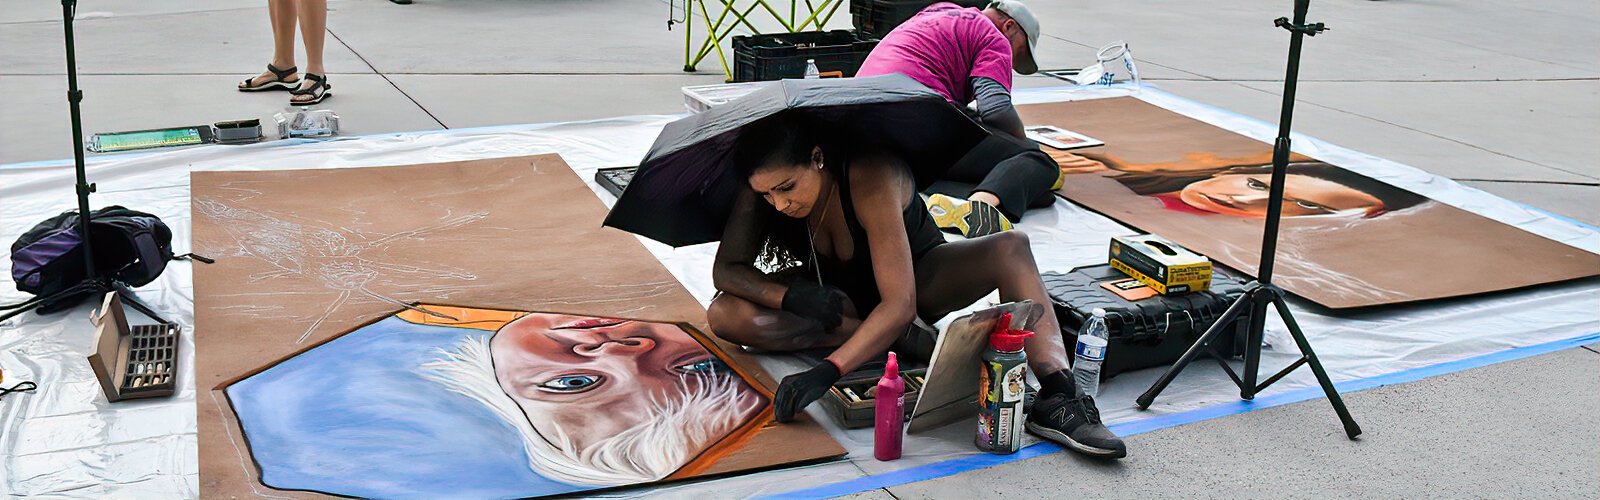 St Petersburg-based chalk artist Laura Thomas takes part in the Tampa Bay Businesses for Culture and the Arts Chalk Walk, which gives commissioned artists the opportunity to show their talents live through 8' x 4' chalk drawings.